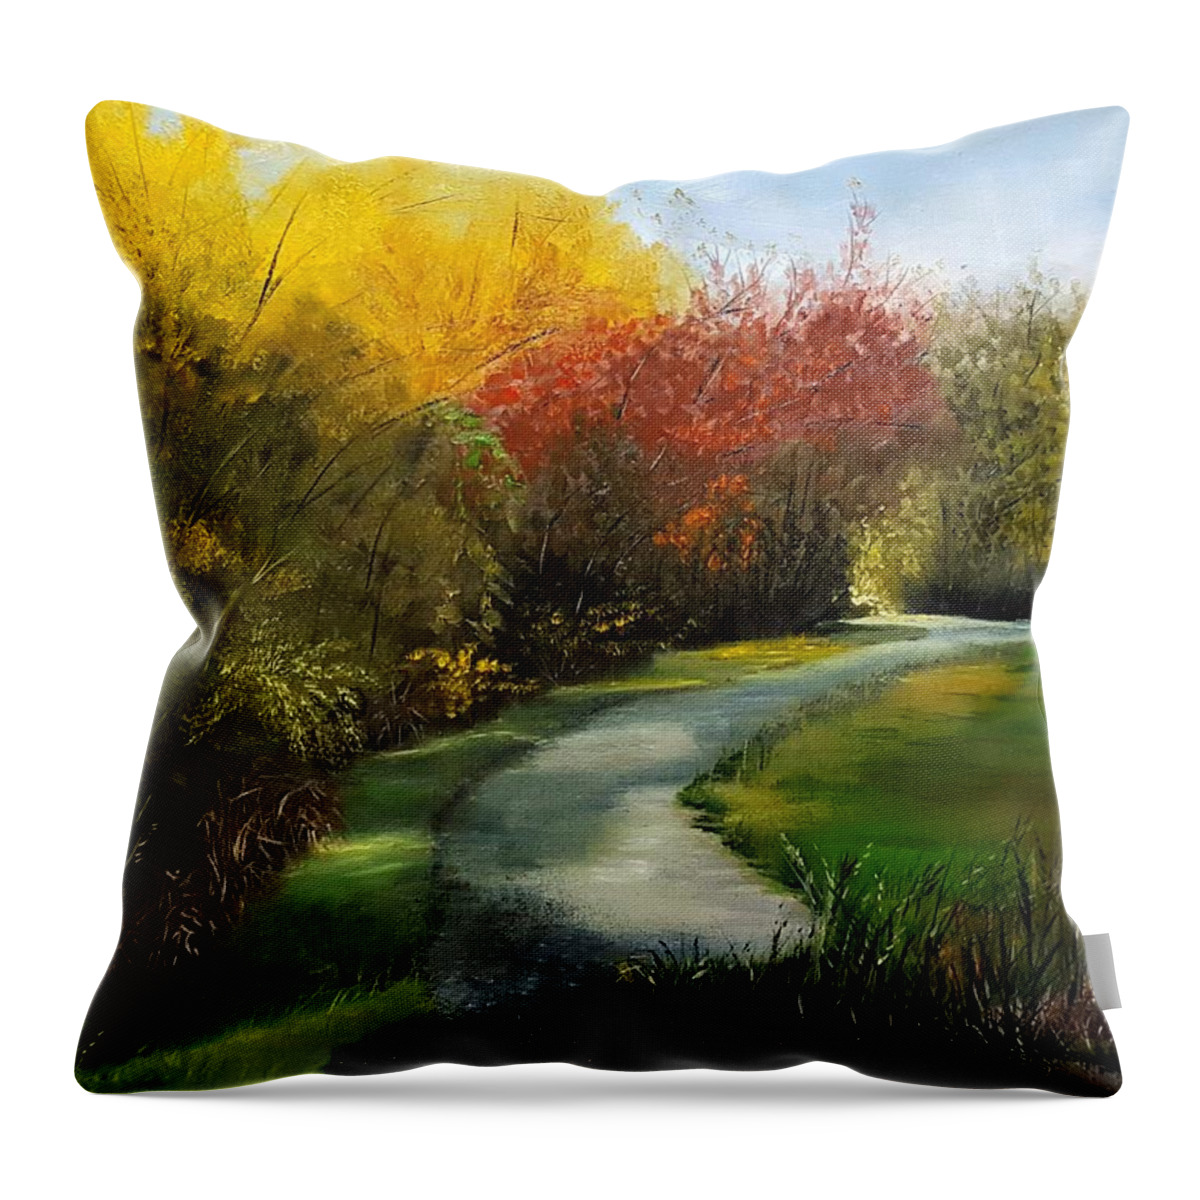 Autumn Color Throw Pillow featuring the painting October In The Park by Connie Rish